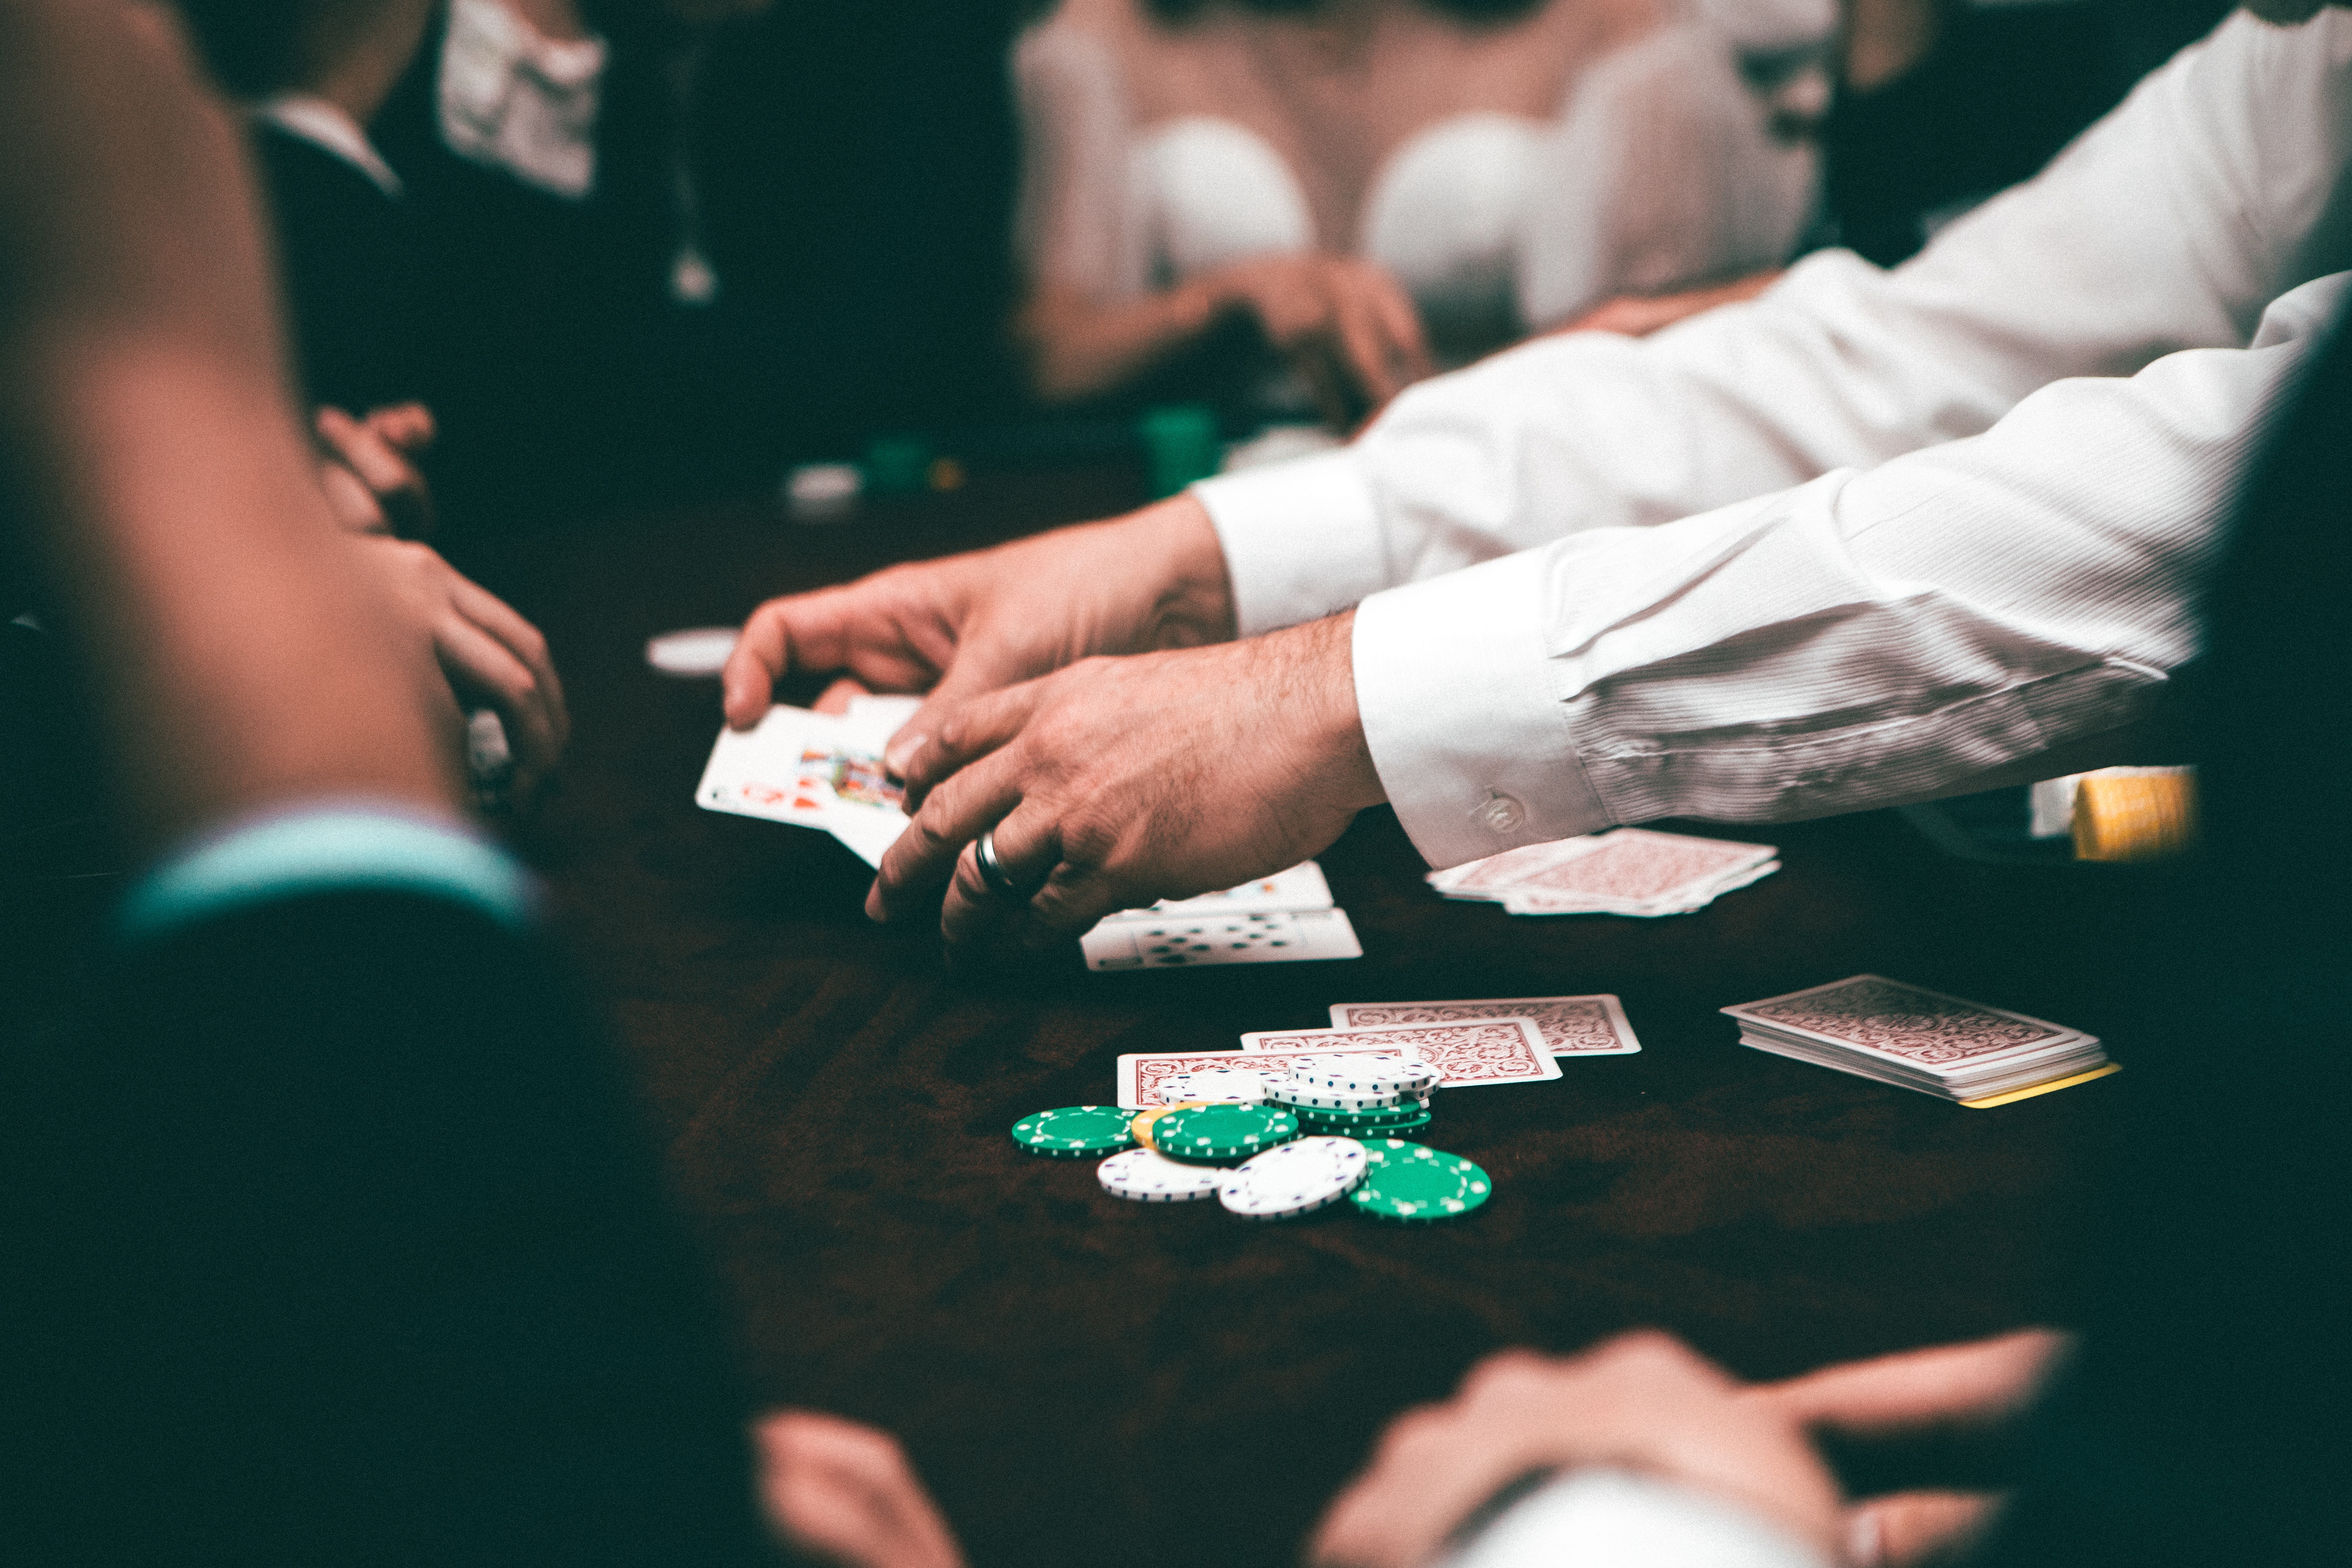 How To Start A Business With online casino